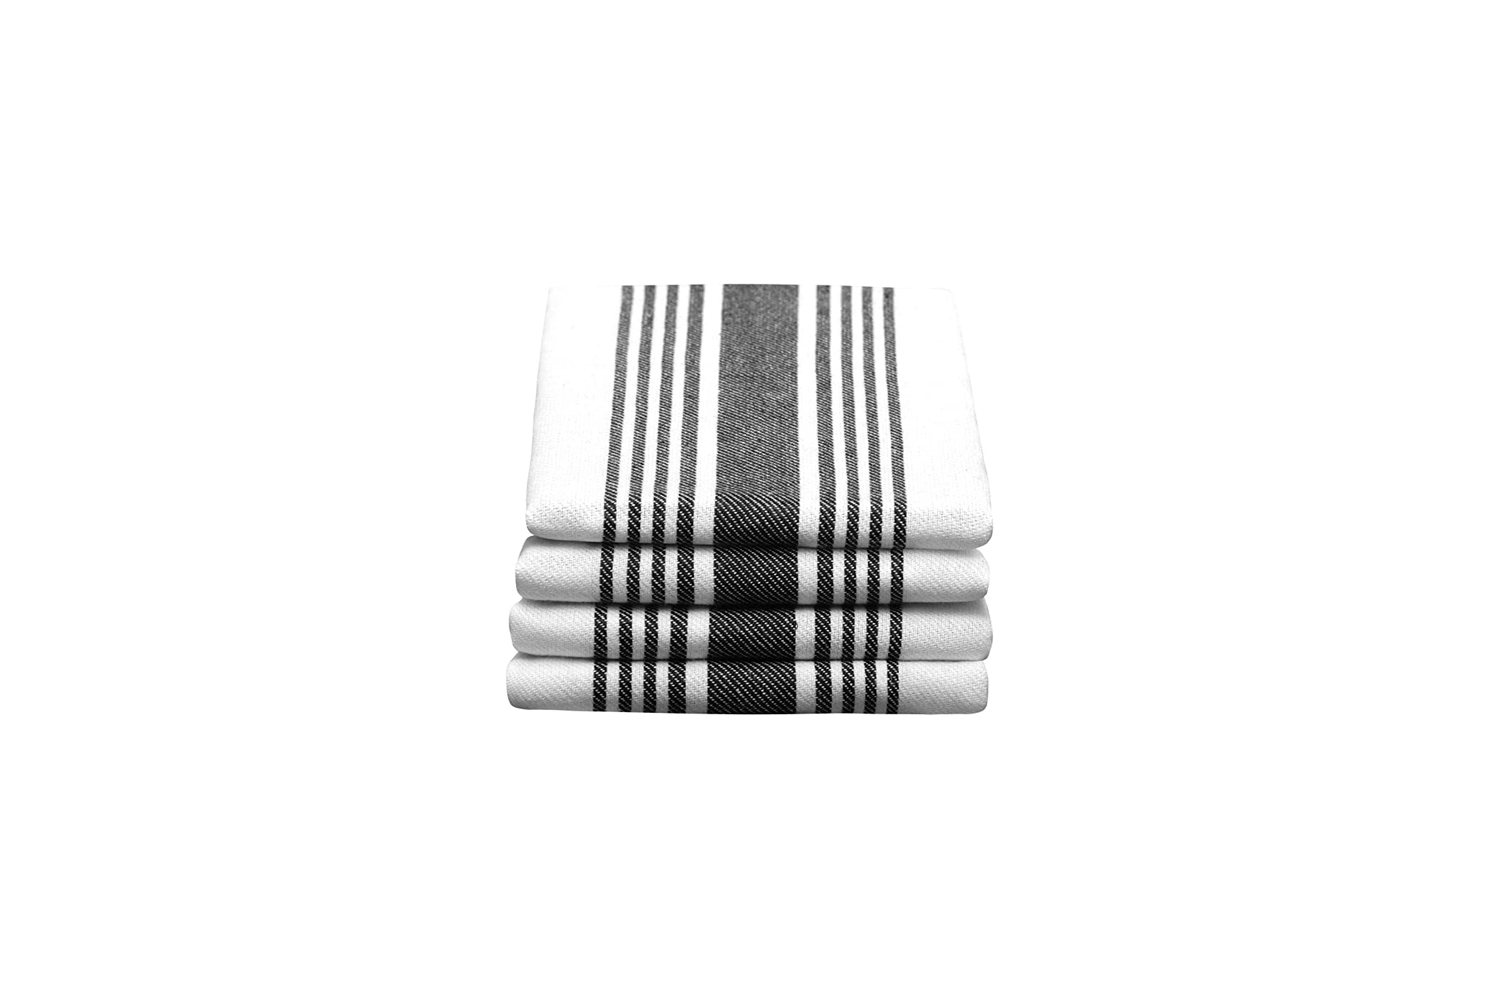 for a similar black striped kitchen towel, the all cotton and linen black strip 20